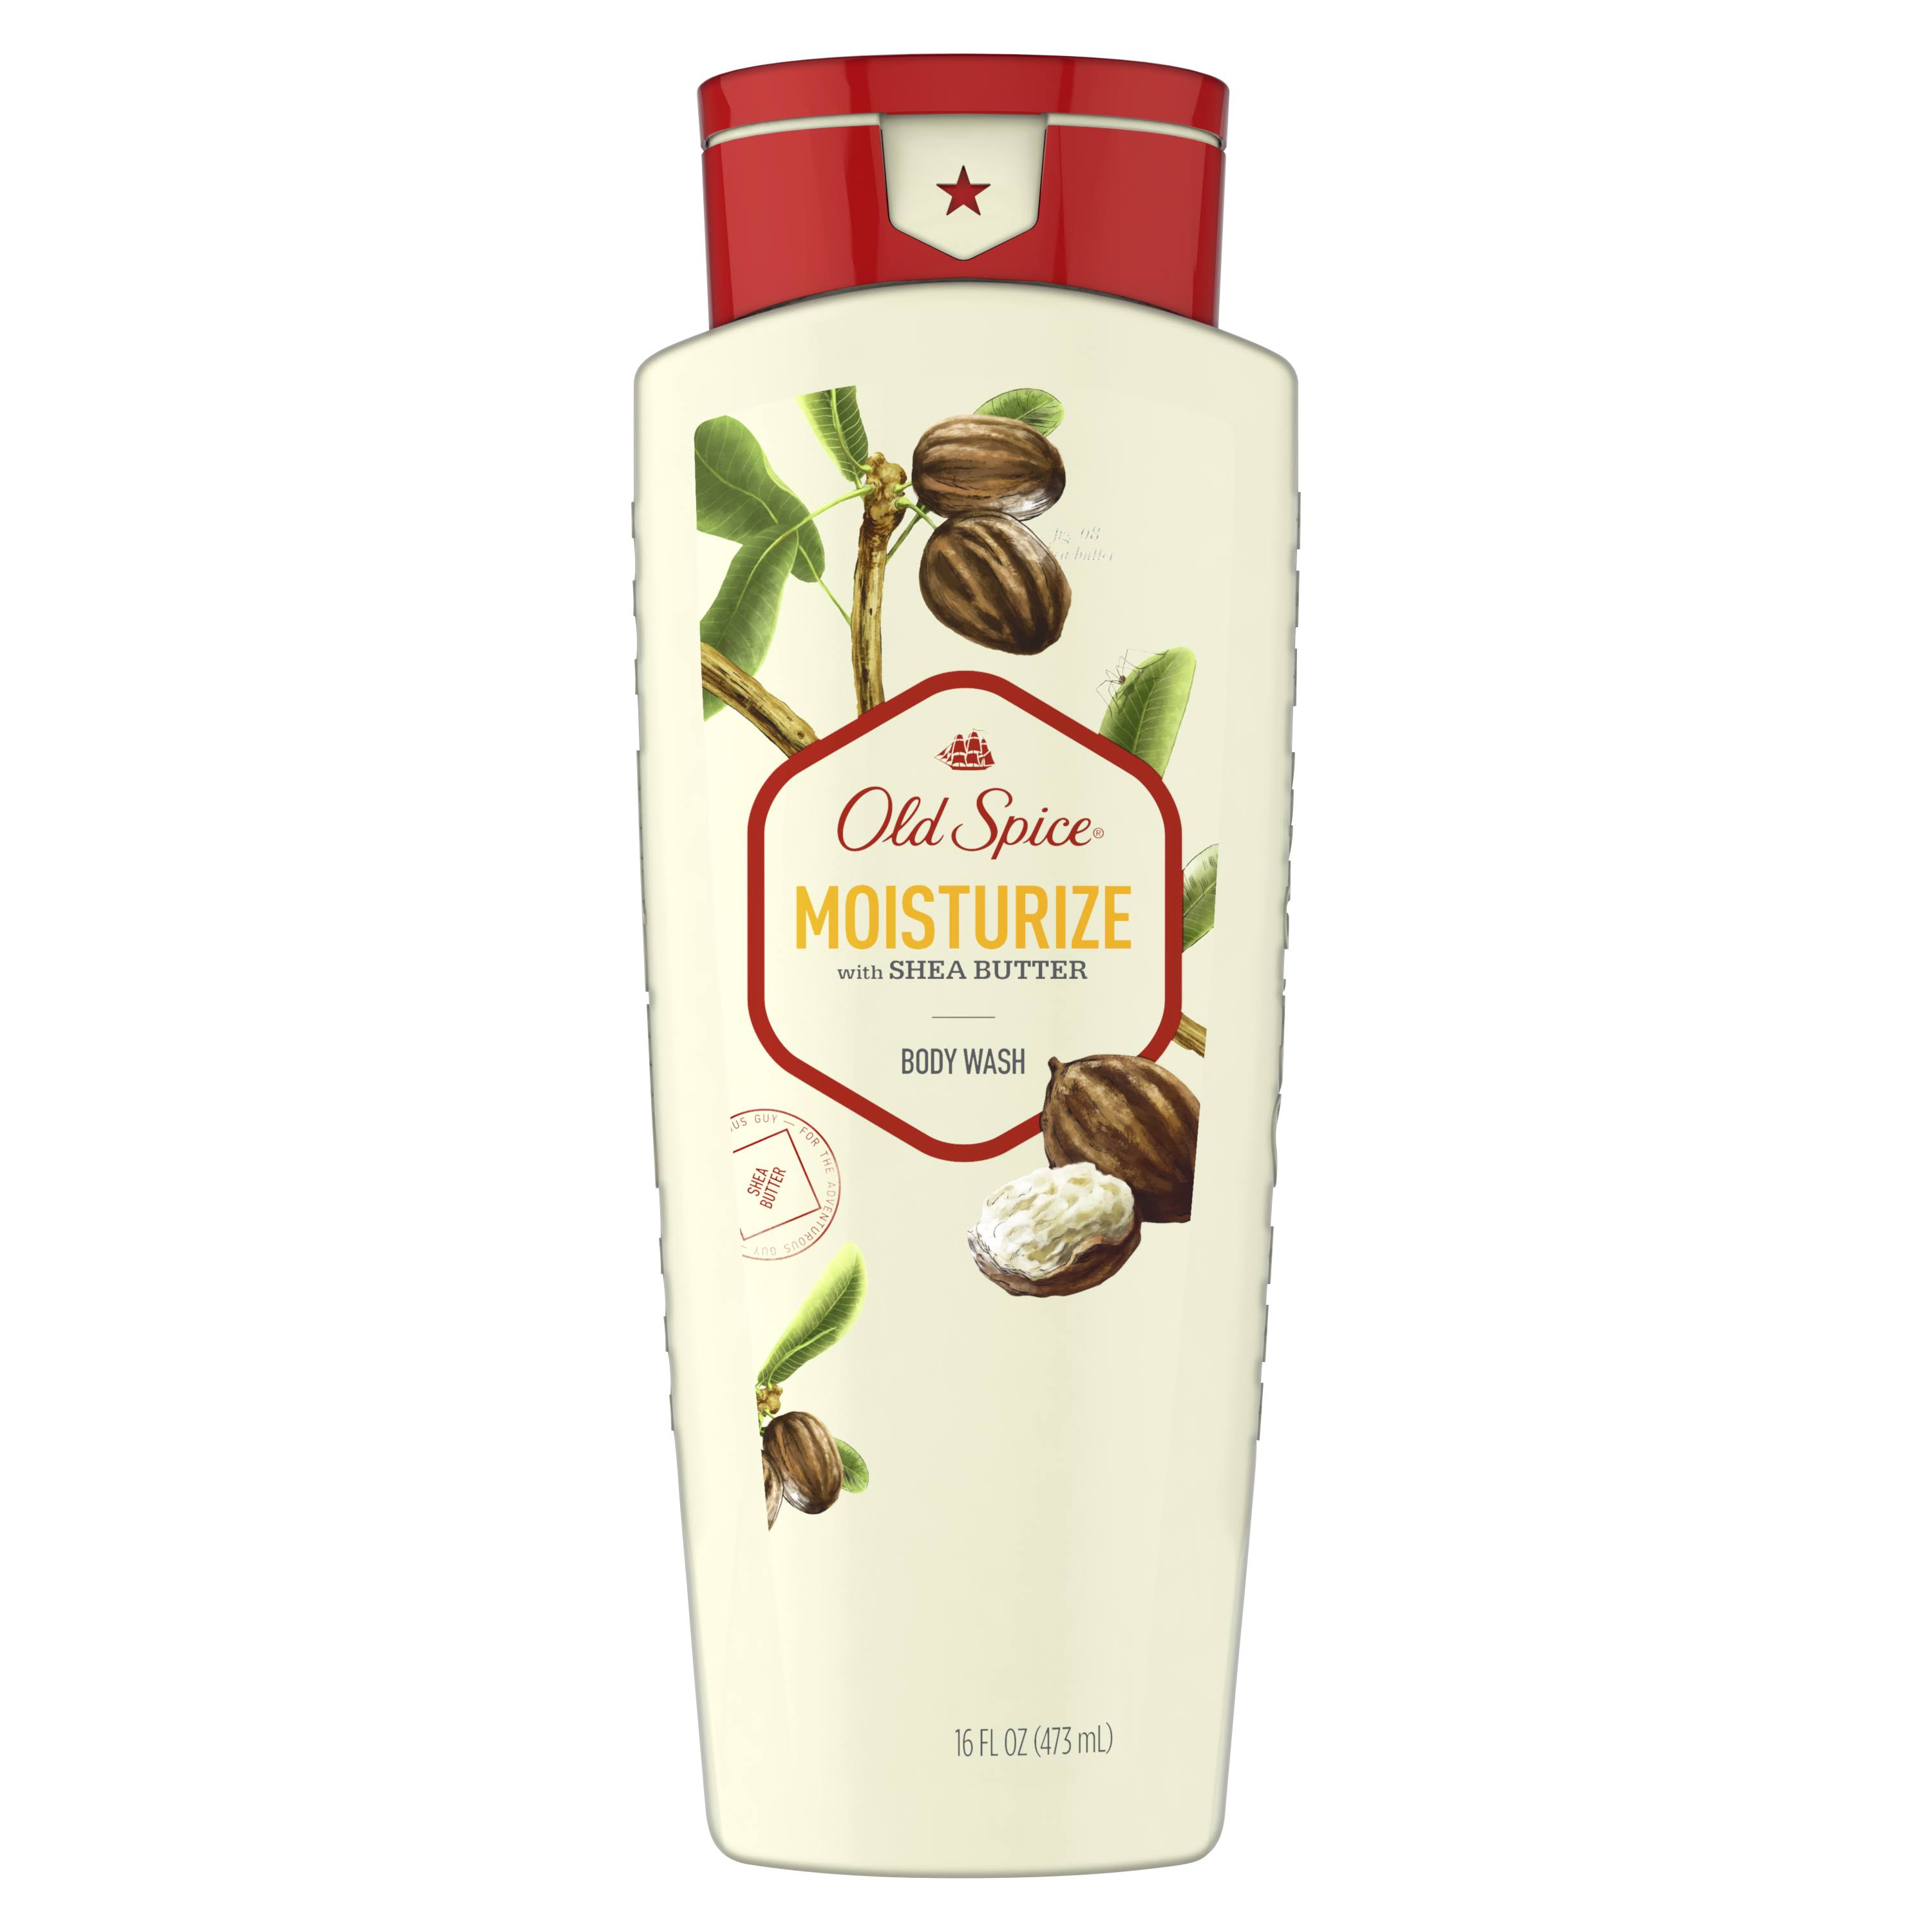 Old Spice Body Wash, Moisturize with Shea Butter - 16 fl oz